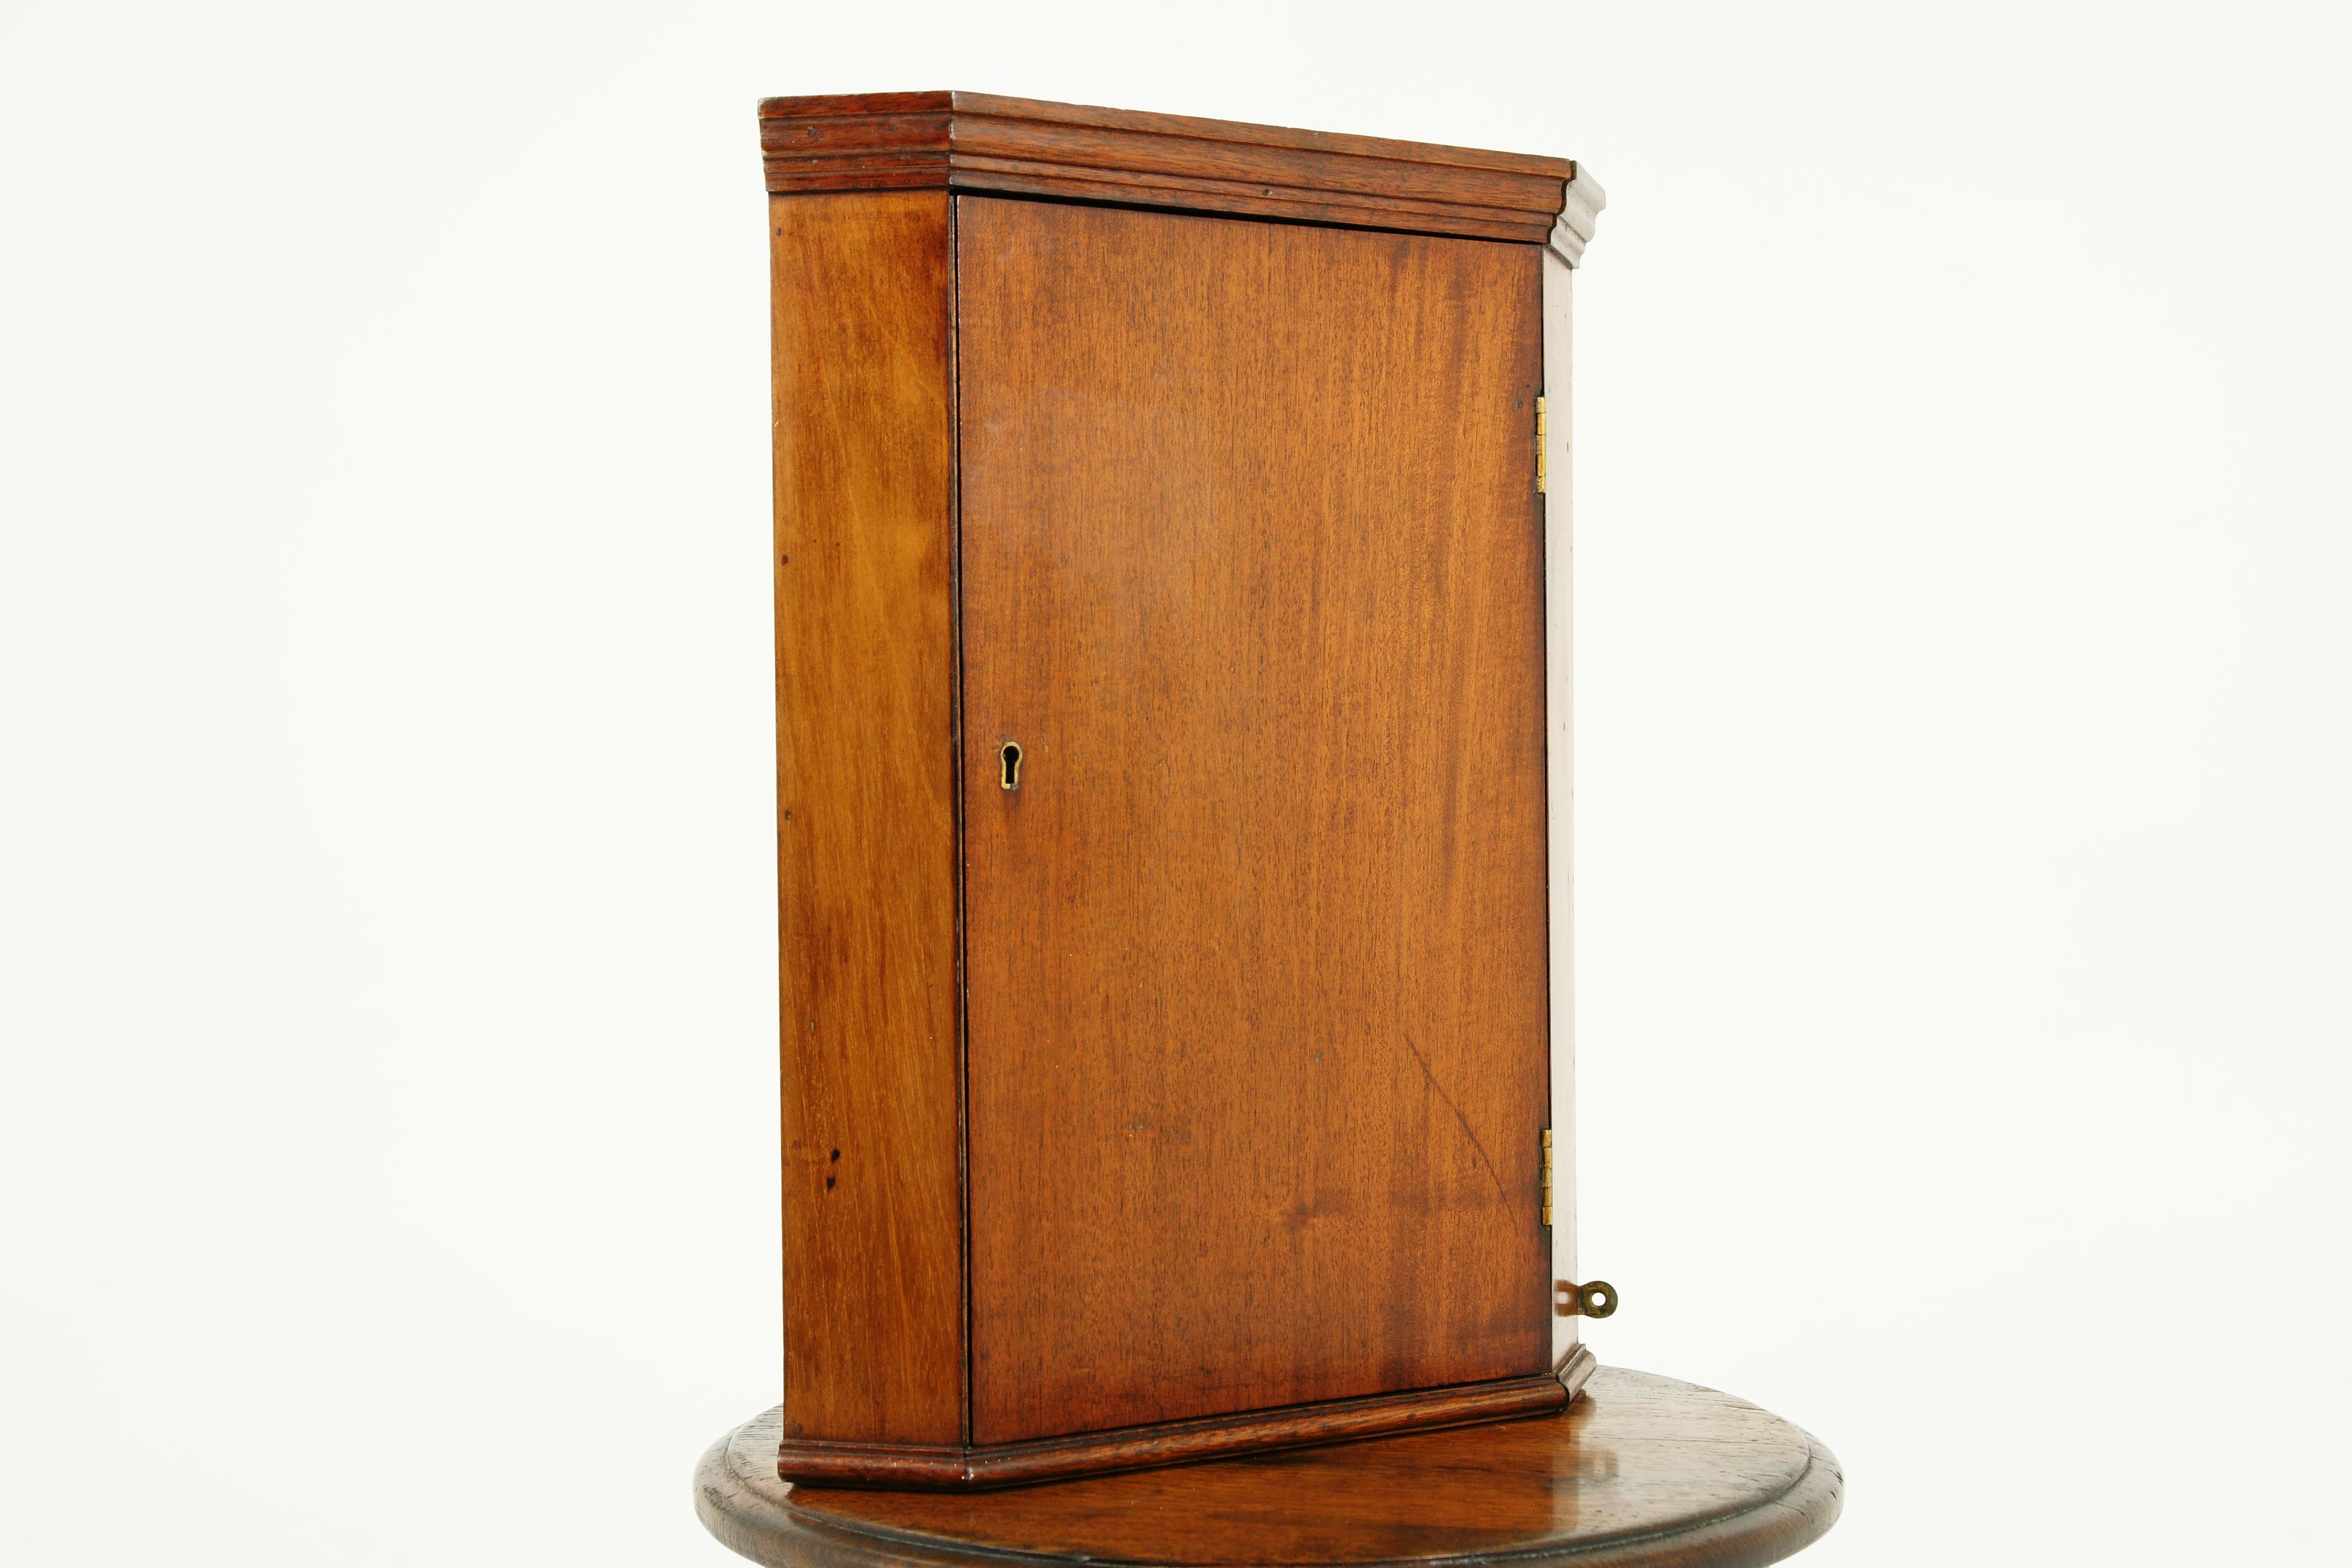 Petite antique mahogany hanging corner cabinet, Scotland 1910, B2391

Scotland 1910
Solid mahogany
Original finish
Moulded cornice on top
Single door to the front
Original lock no key
Inside a single fixed shelf
All standing on a moulded